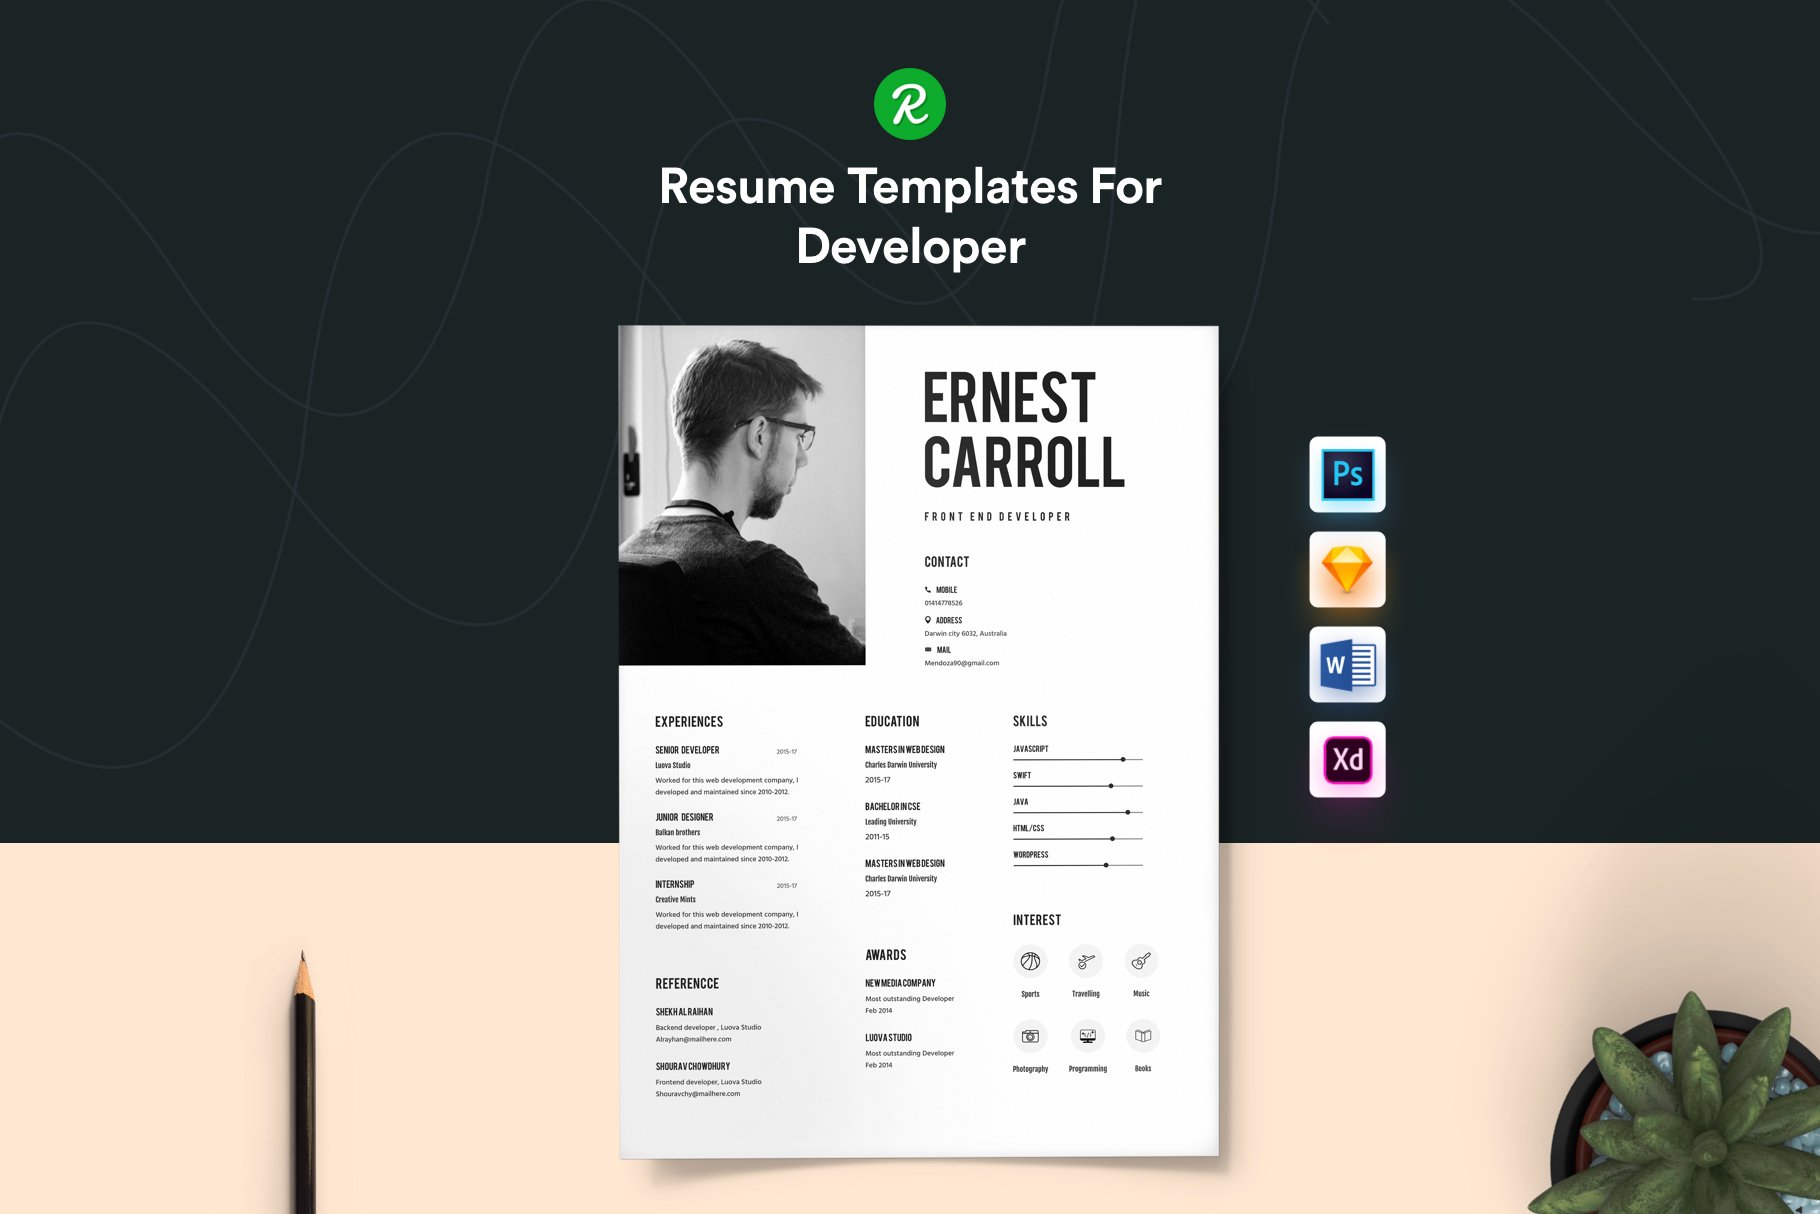 Resume template for a graphic designer.